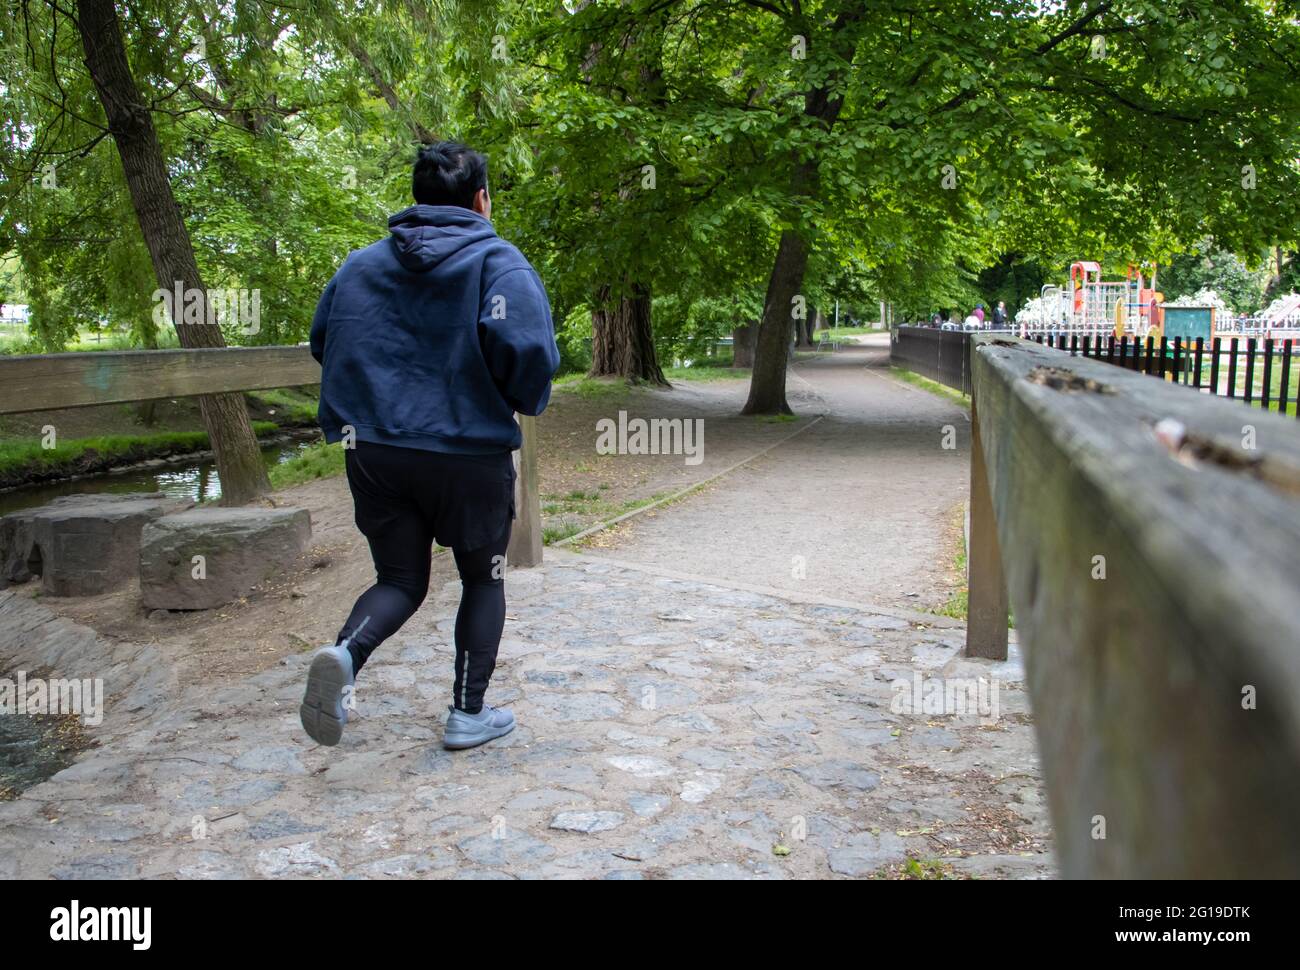 PRAGUE, CZECHIA, MAY 26 2021, A woman running on a path in a city park. Stock Photo